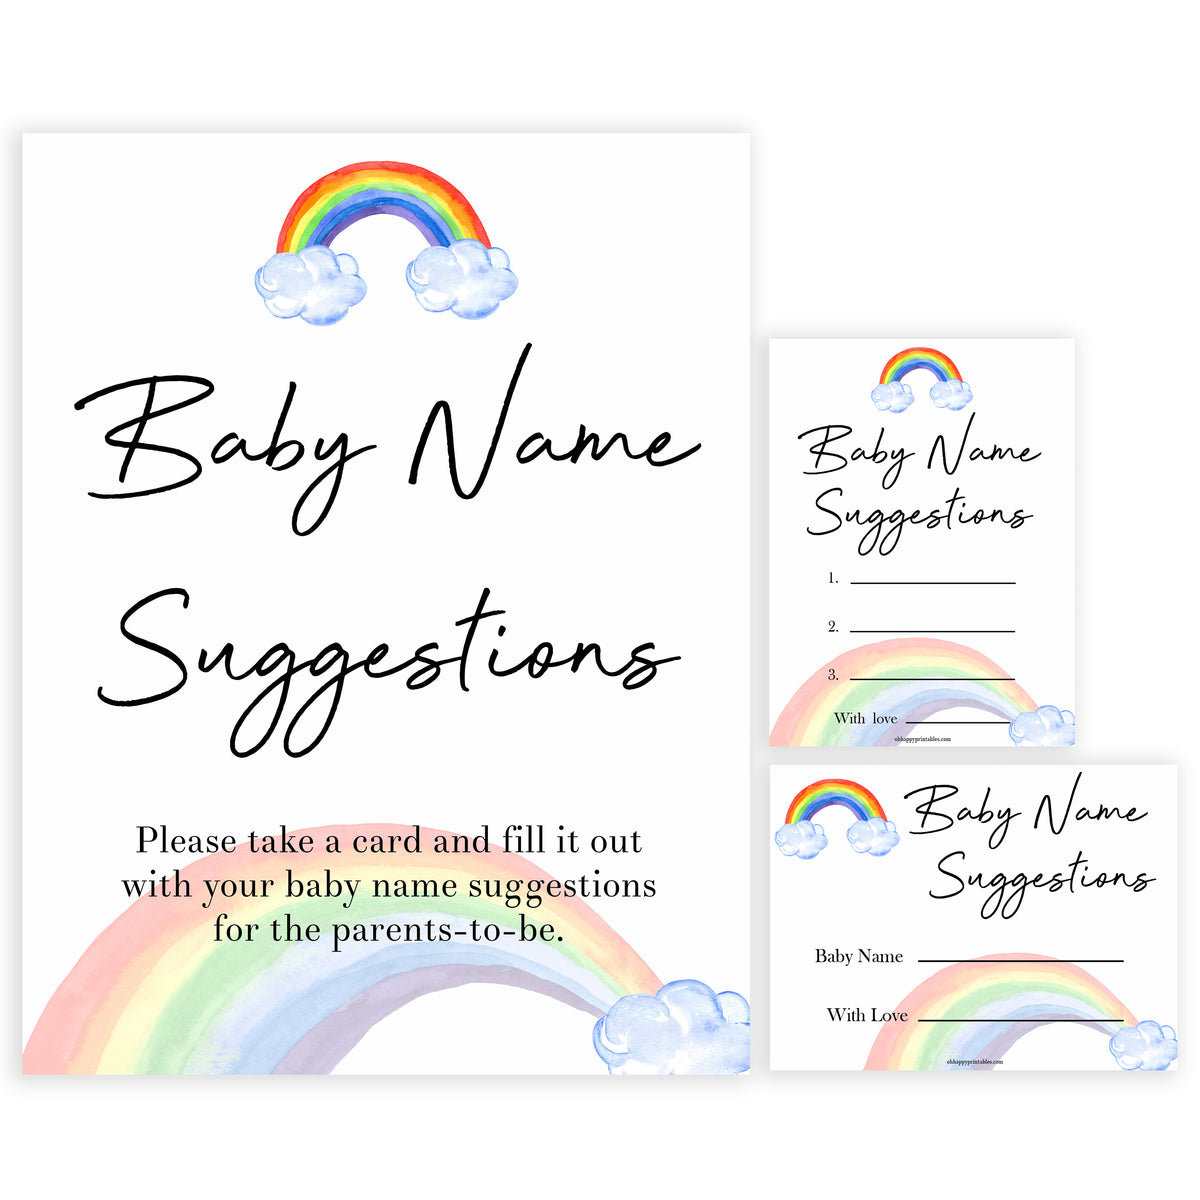 Rainbow baby games, rainbow baby name suggestions, rainbow printable baby games, instant download games, rainbow baby shower, printable baby games, fun baby games, popular baby games, top 10 baby games